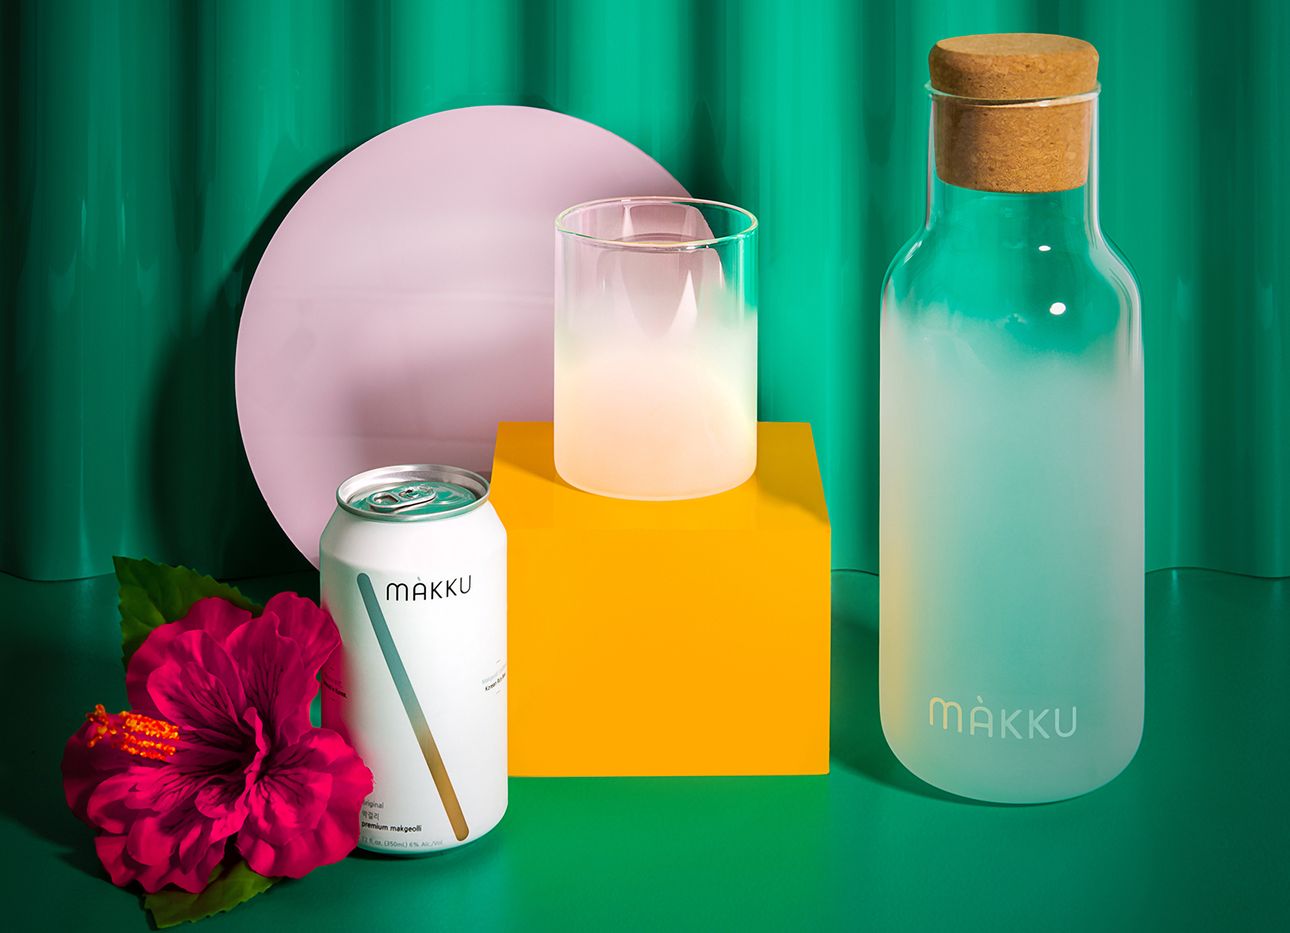 A carafe, glass, and can of Makku on a green backdrop.